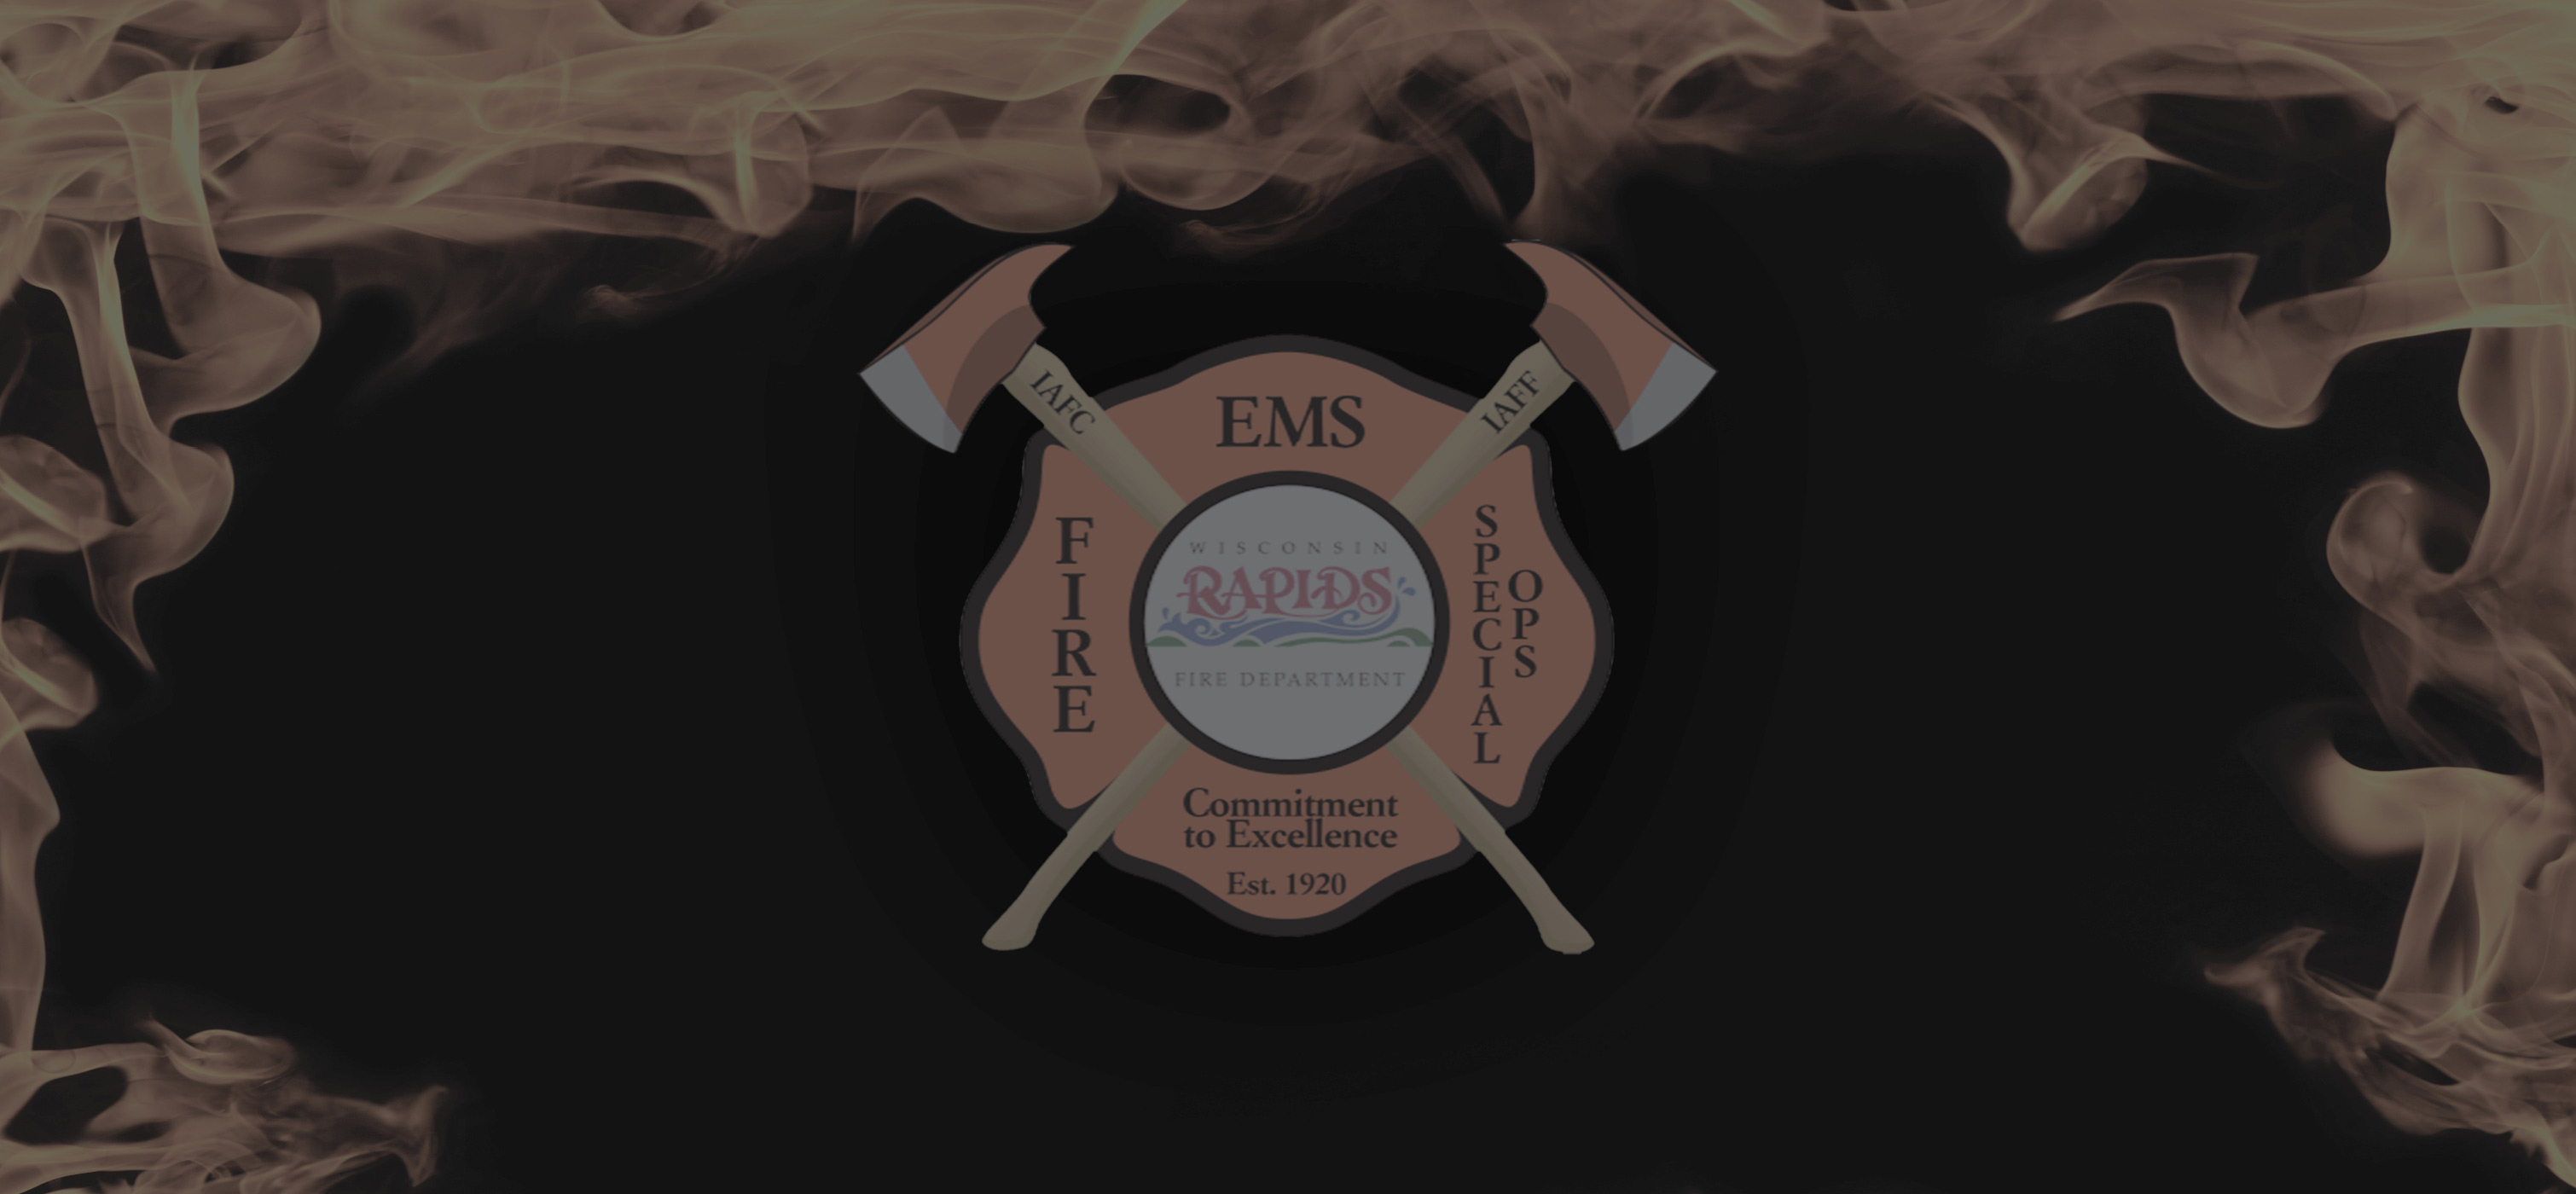 Wisconsin Rapids Fire EMS Special ops logo. "Commitment to Excellence" Est. 1920